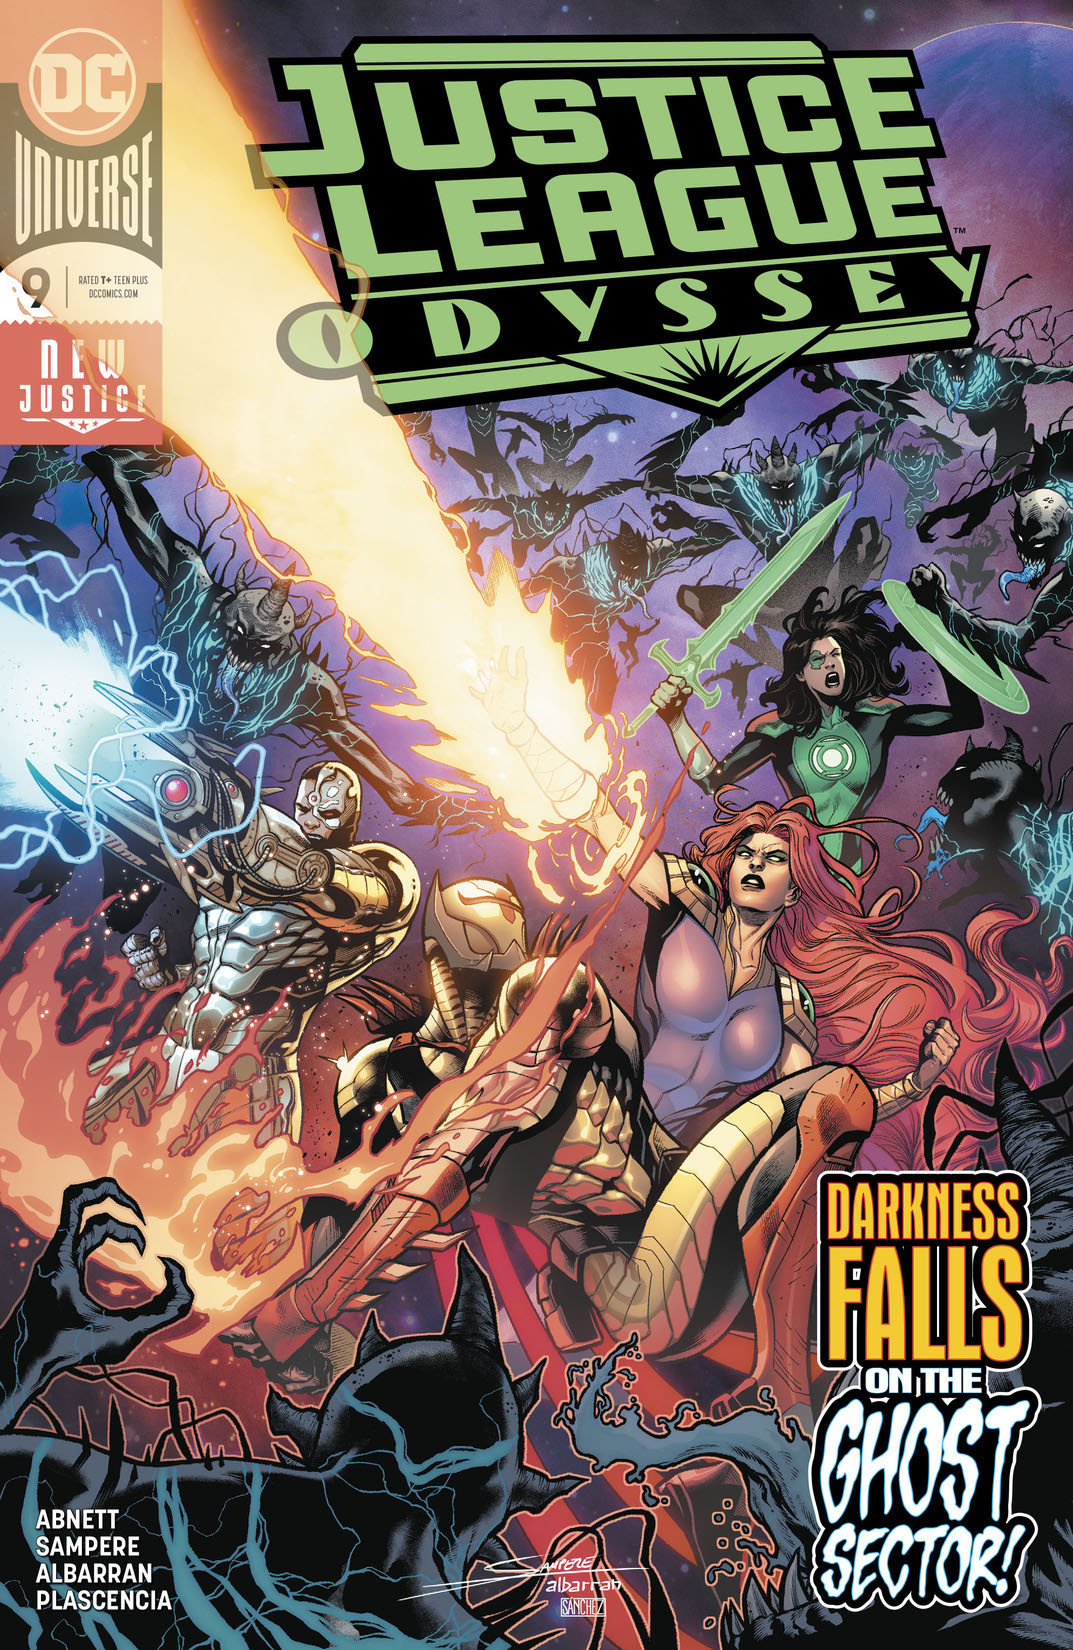 Justice League Odyssey #9 preview images